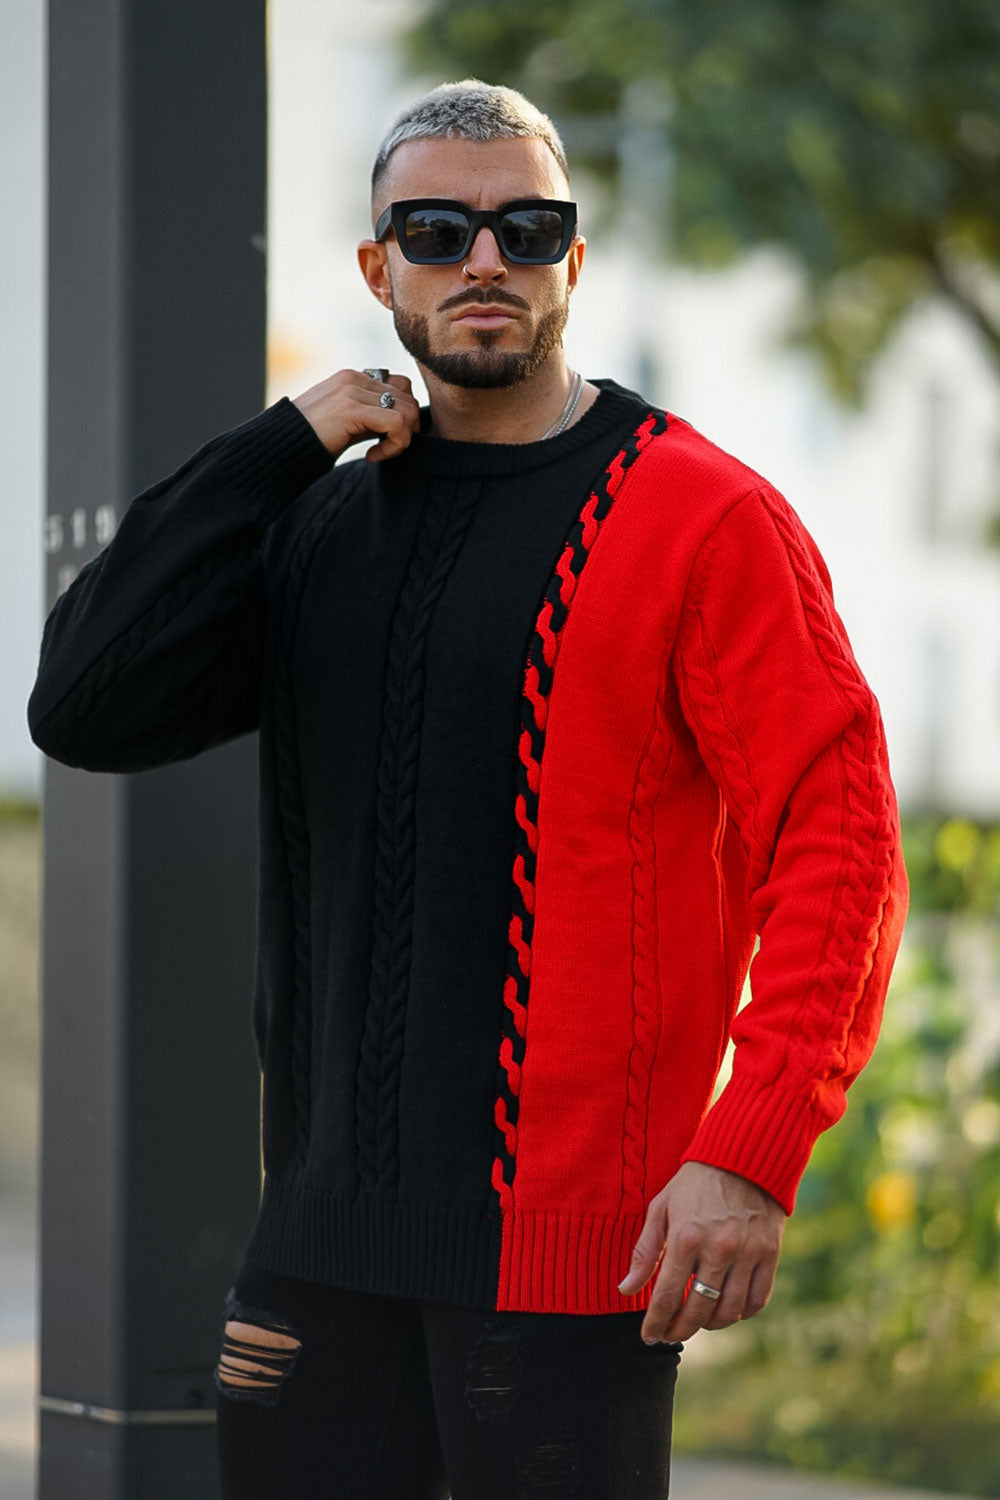 Gingtto Mens Sweater Long Sleeve Slim Fit Black And Red Sweater